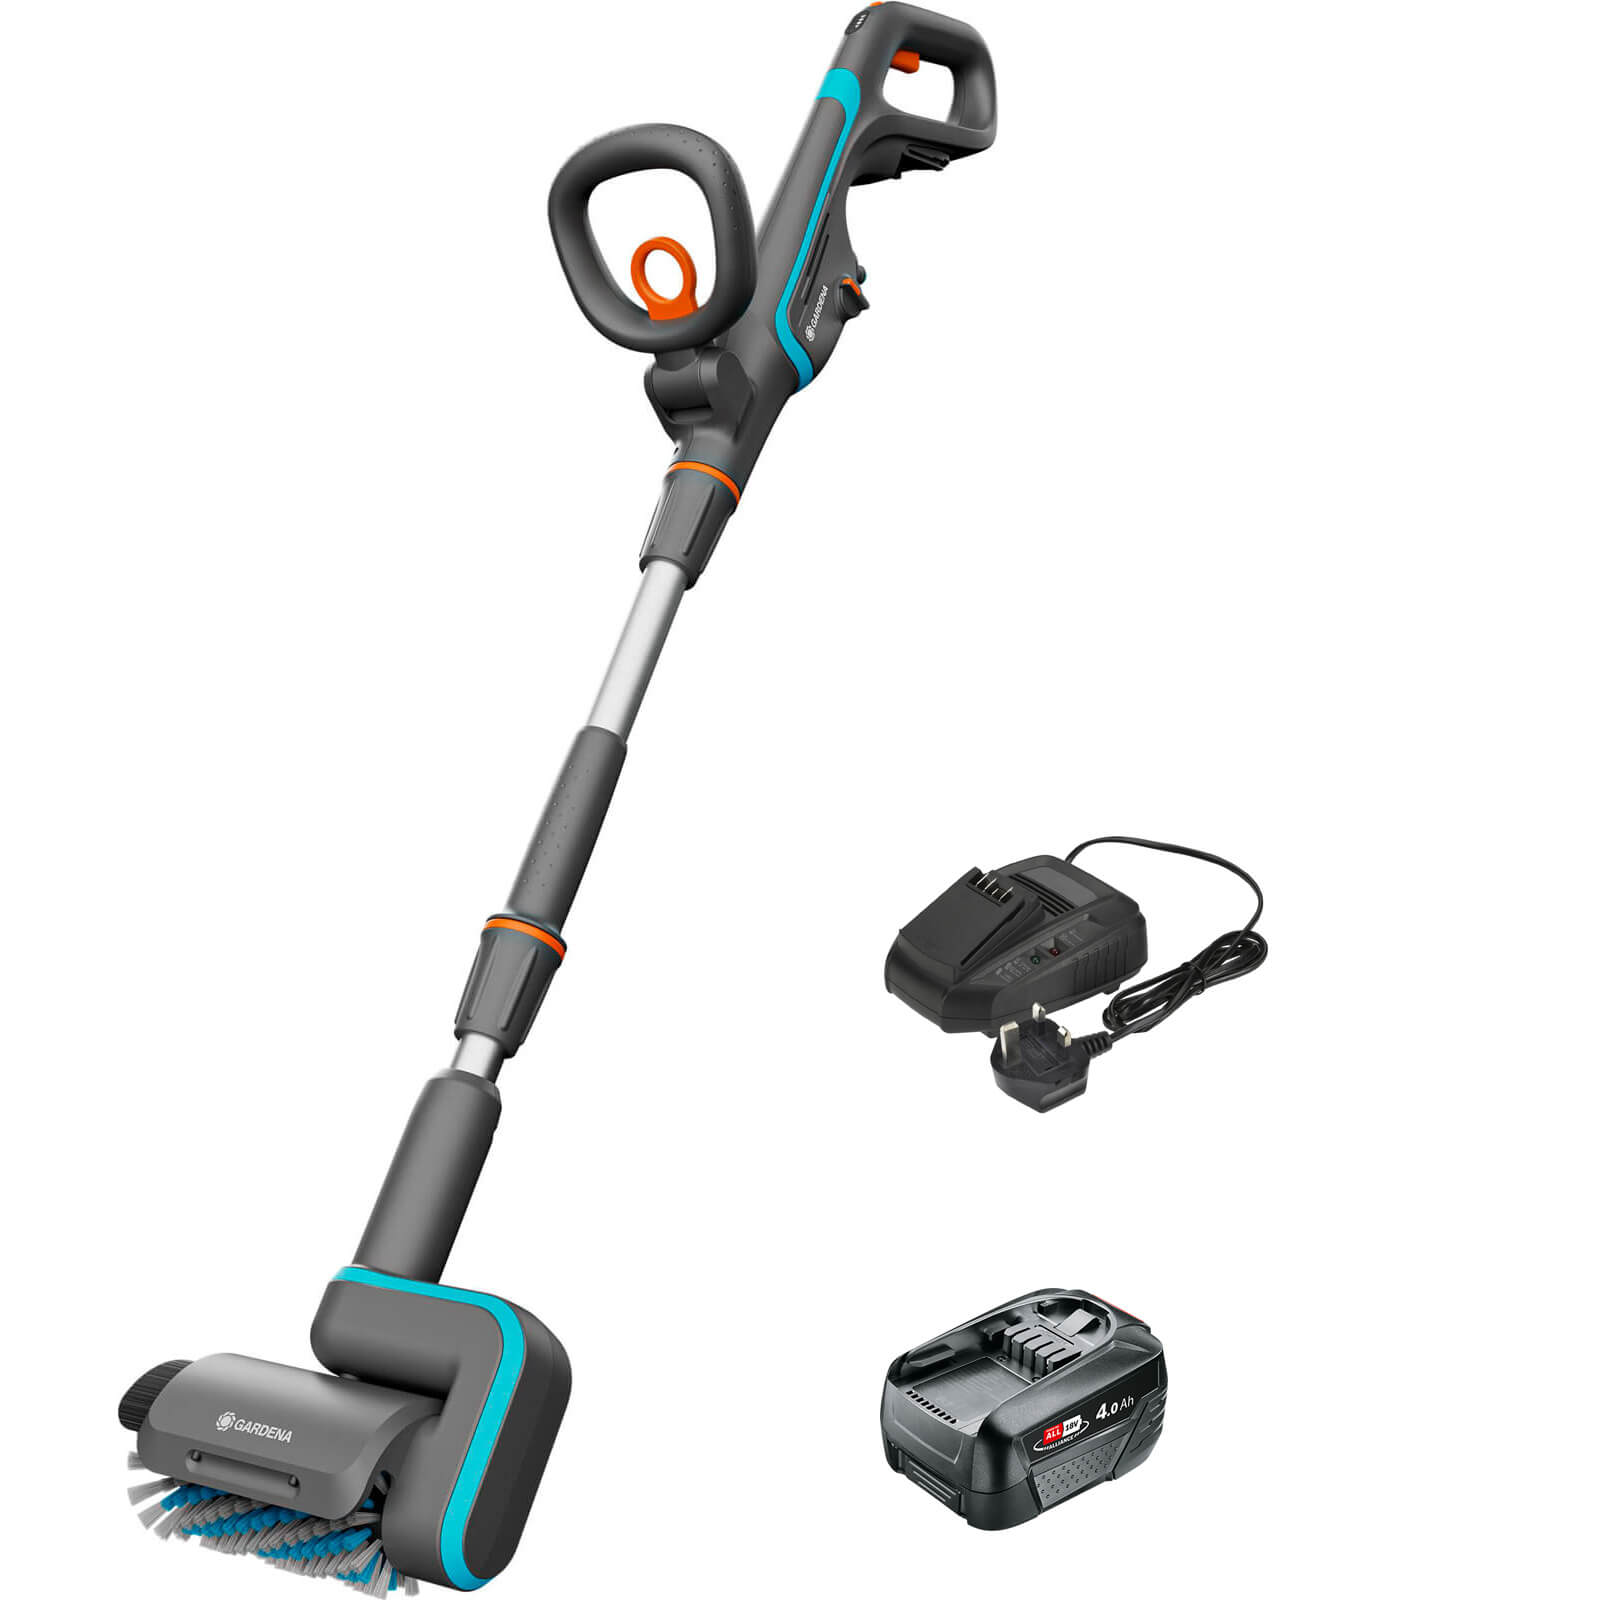 Gardena AQUABRUSH P4A 18v Cordless Patio and Surface Cleaner 1 x 4ah Li-ion Charger